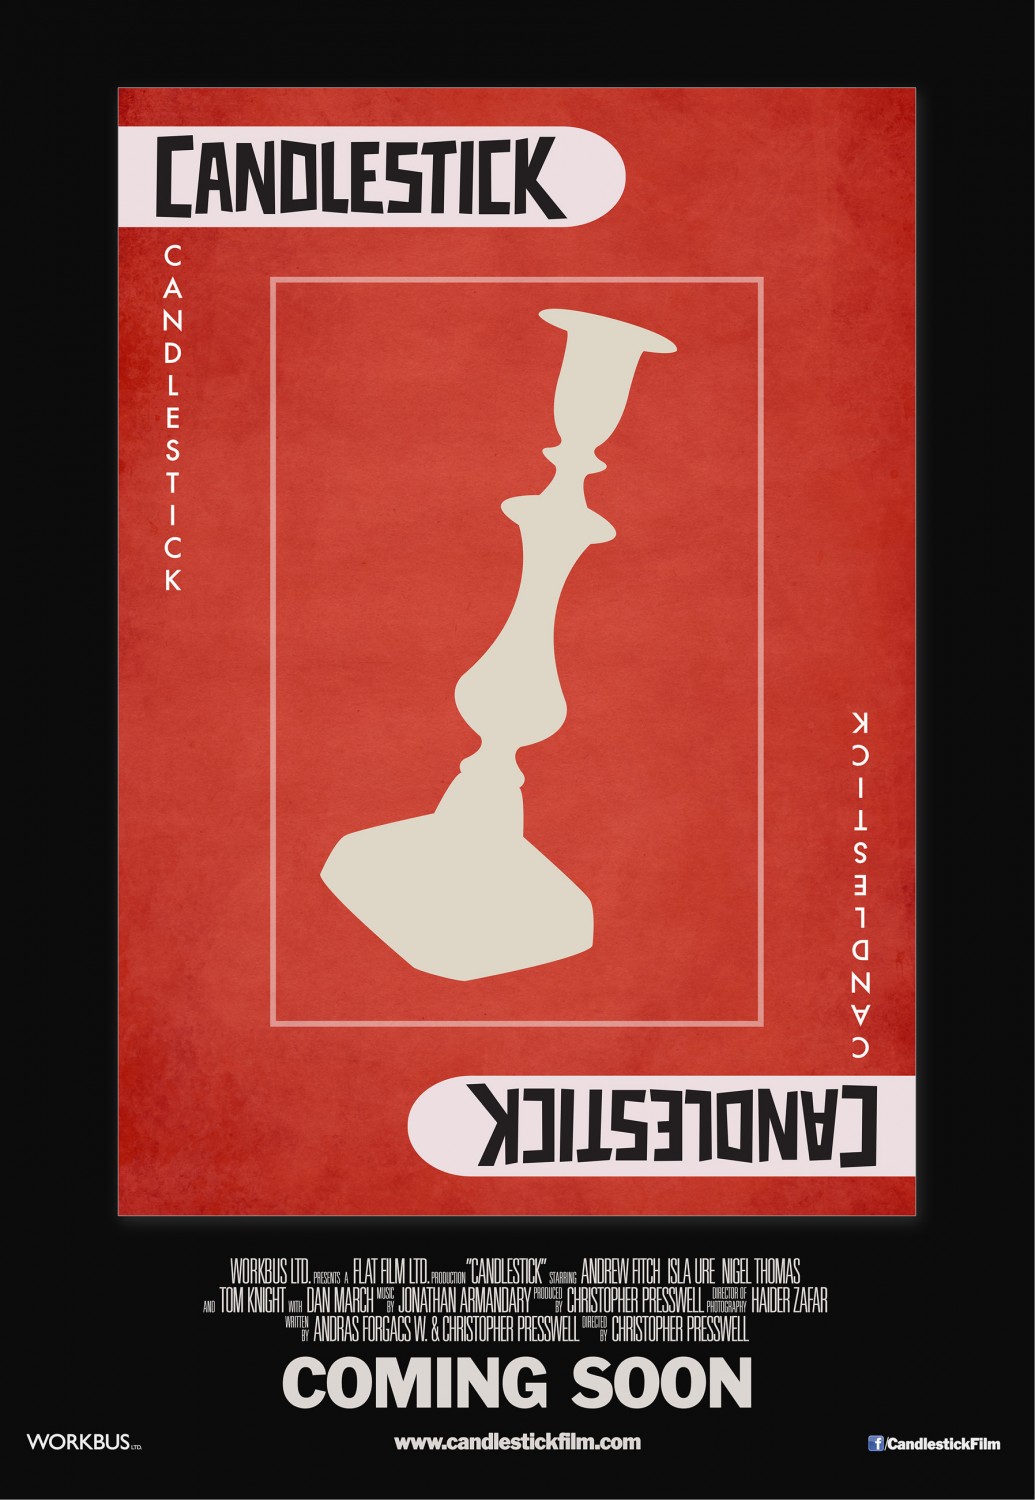 Extra Large Movie Poster Image for Candlestick 